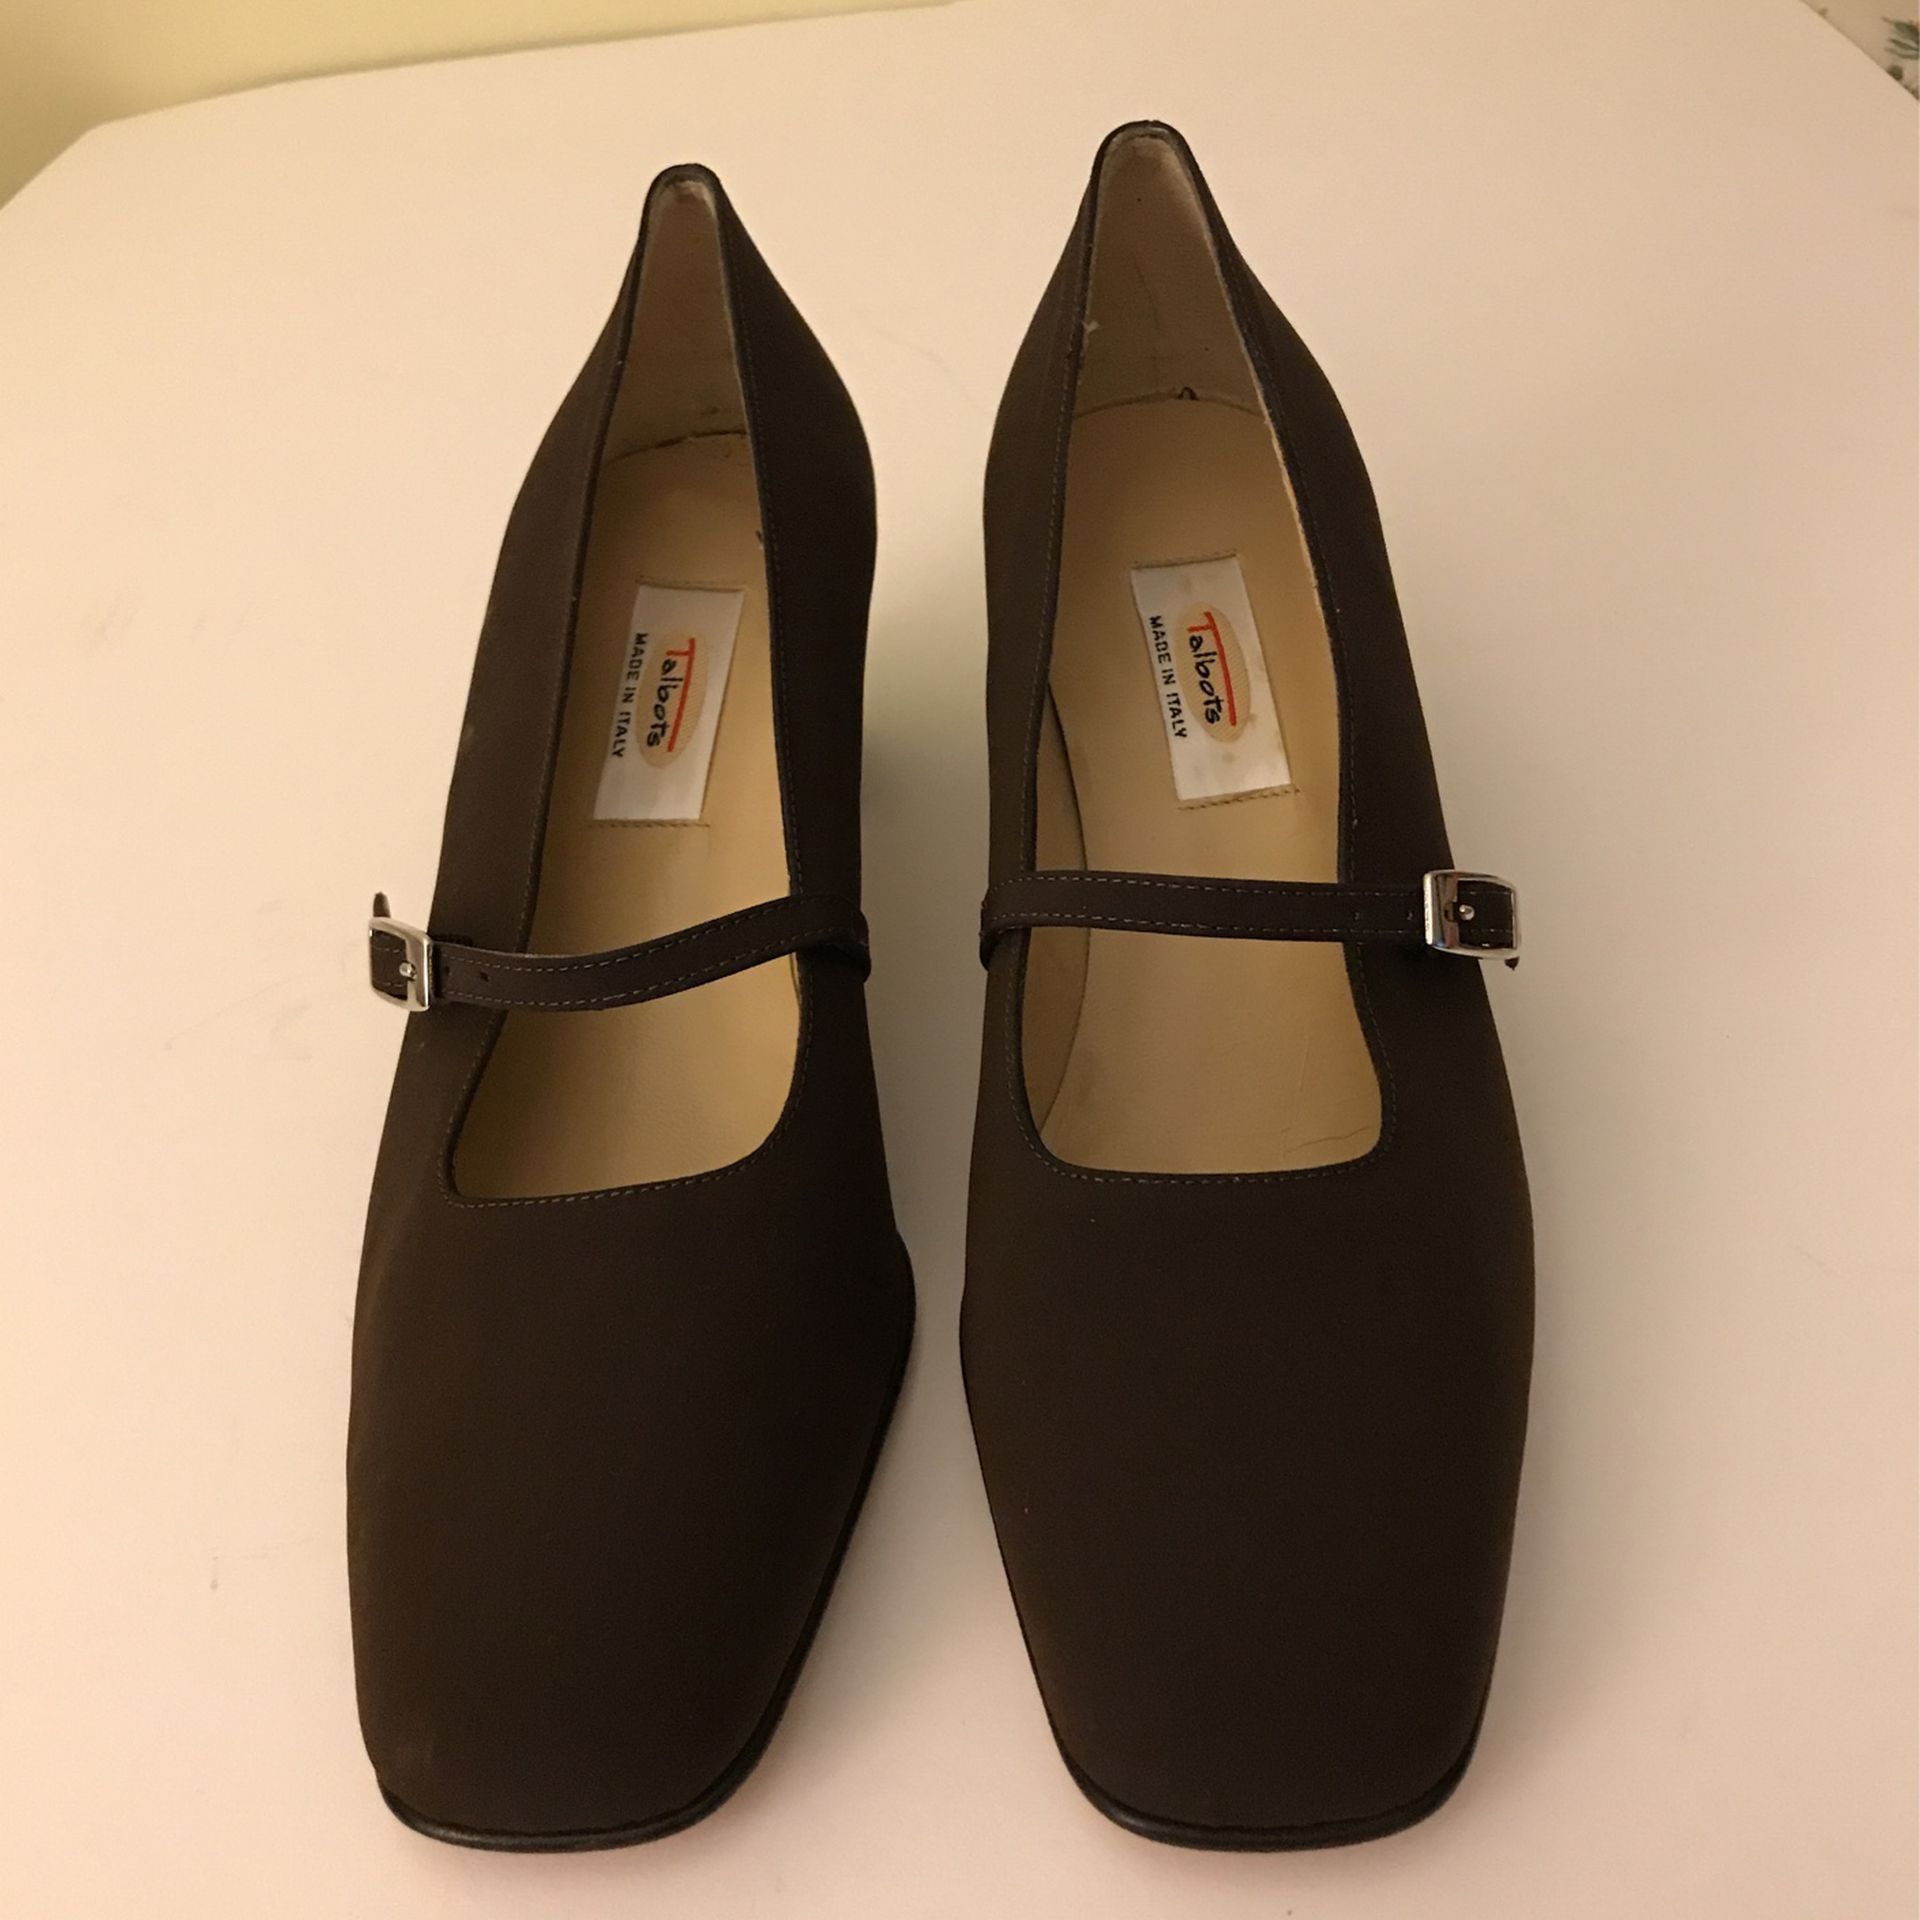 TALBOTS FABRIC UPPER AND LEATHER SOLE BROWN MARY JANE SHOES